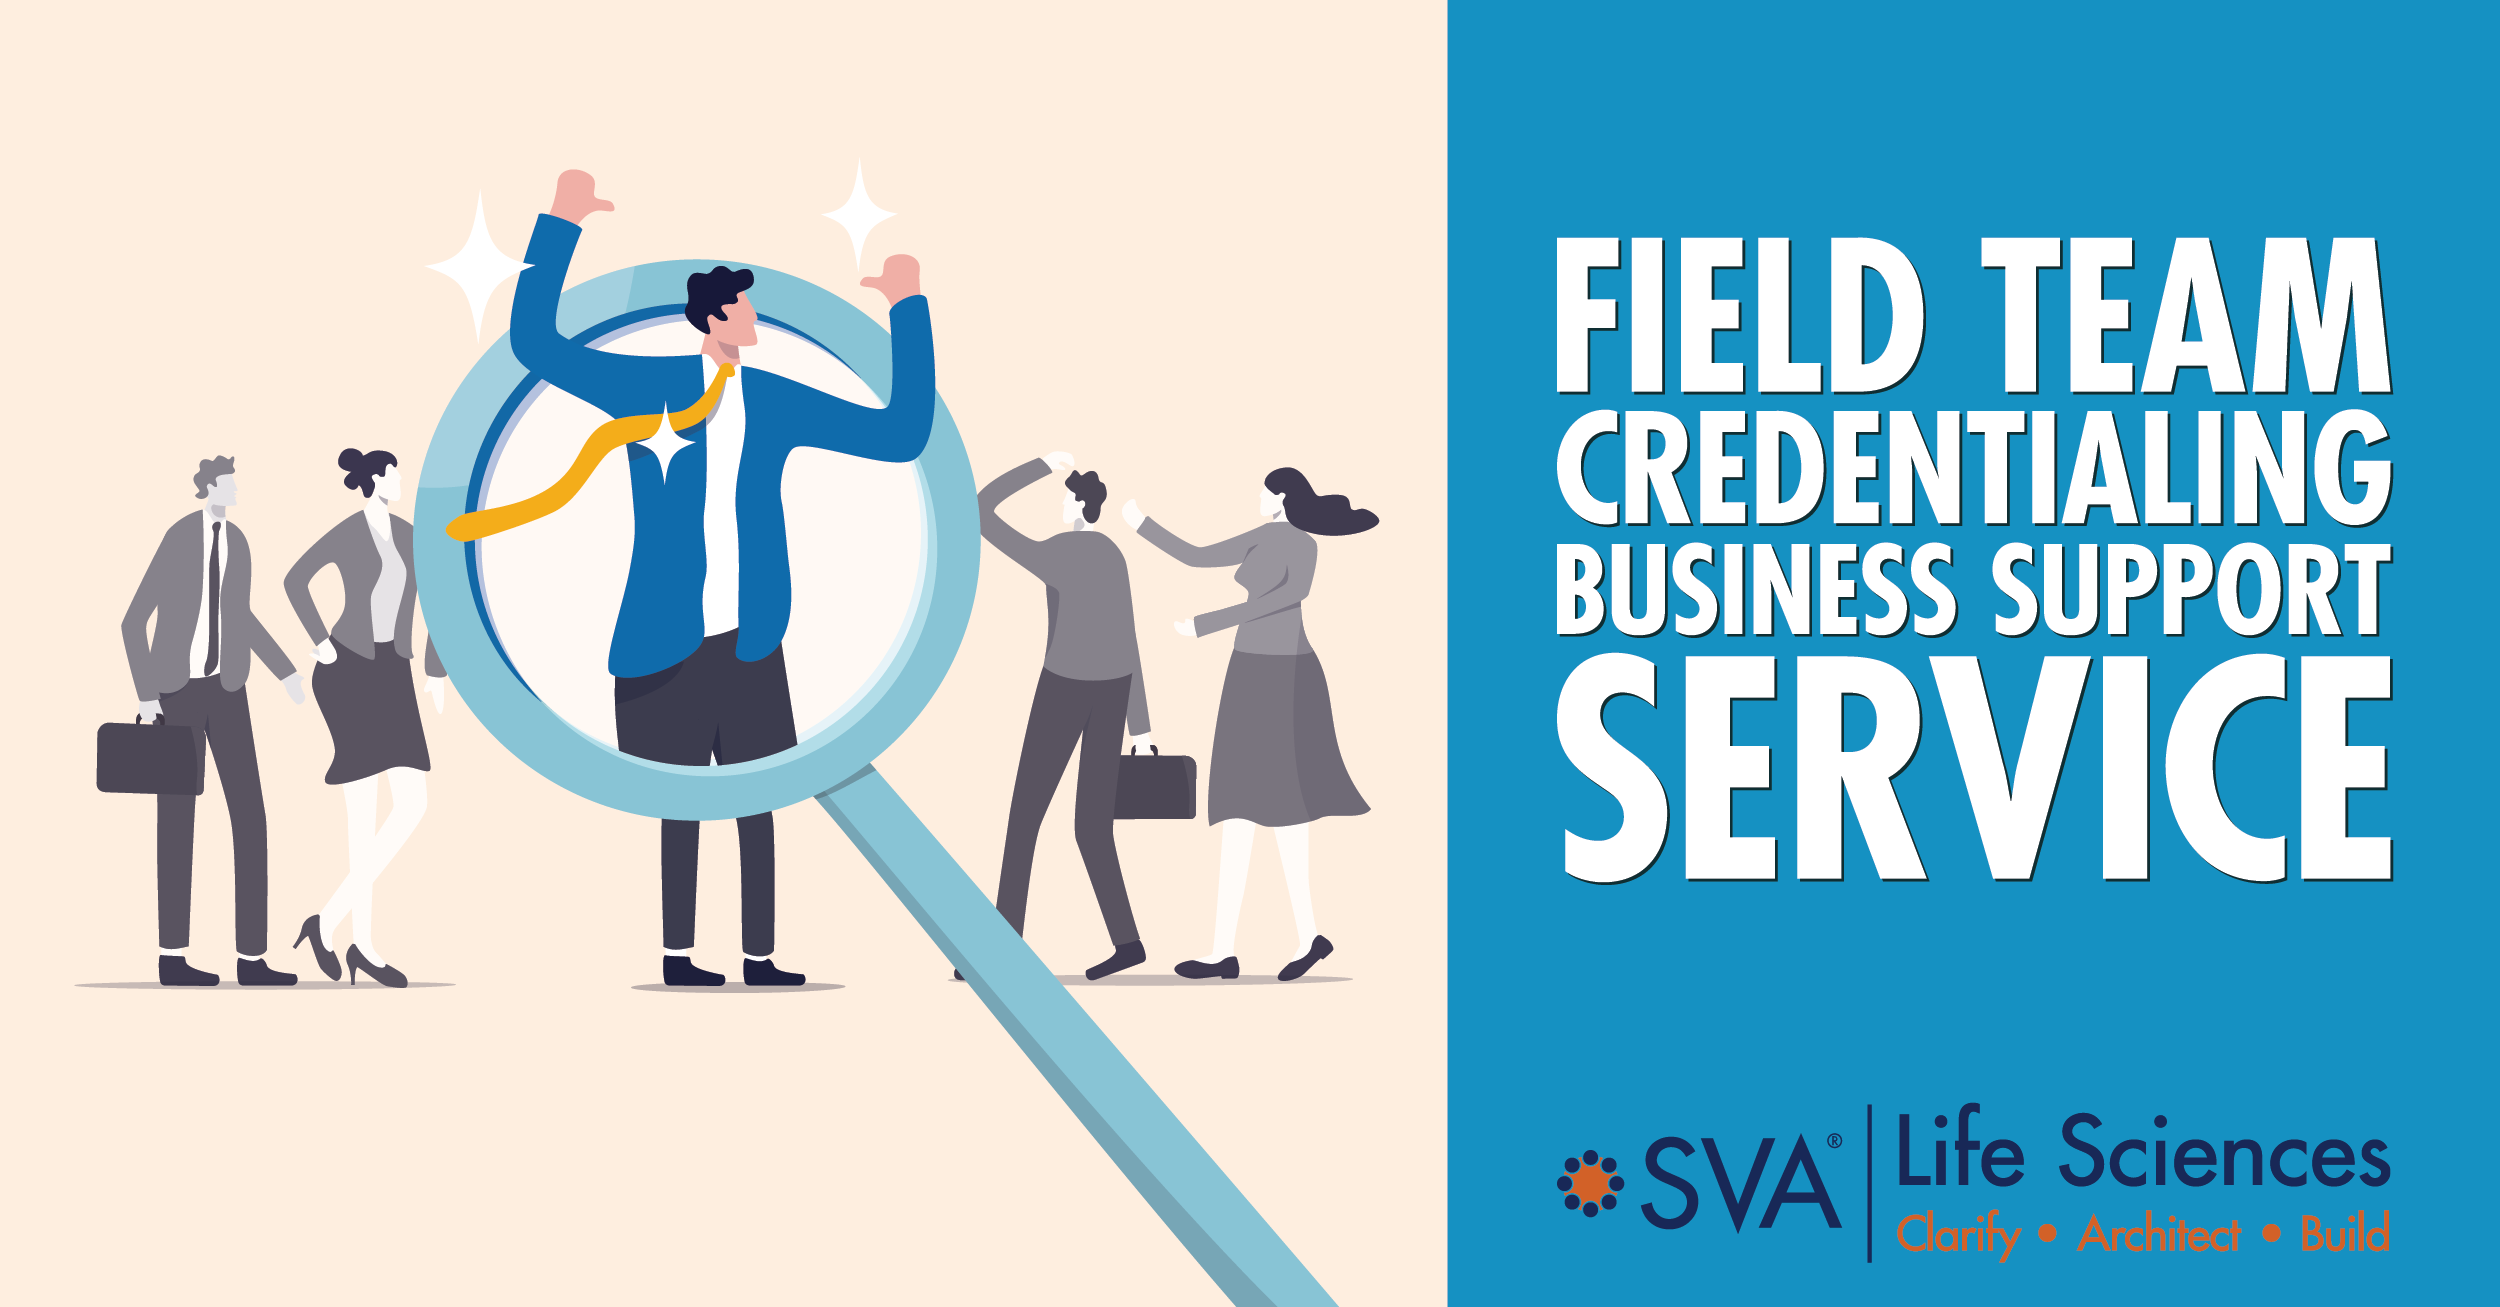 Field Team Credentialing - Business Support Service